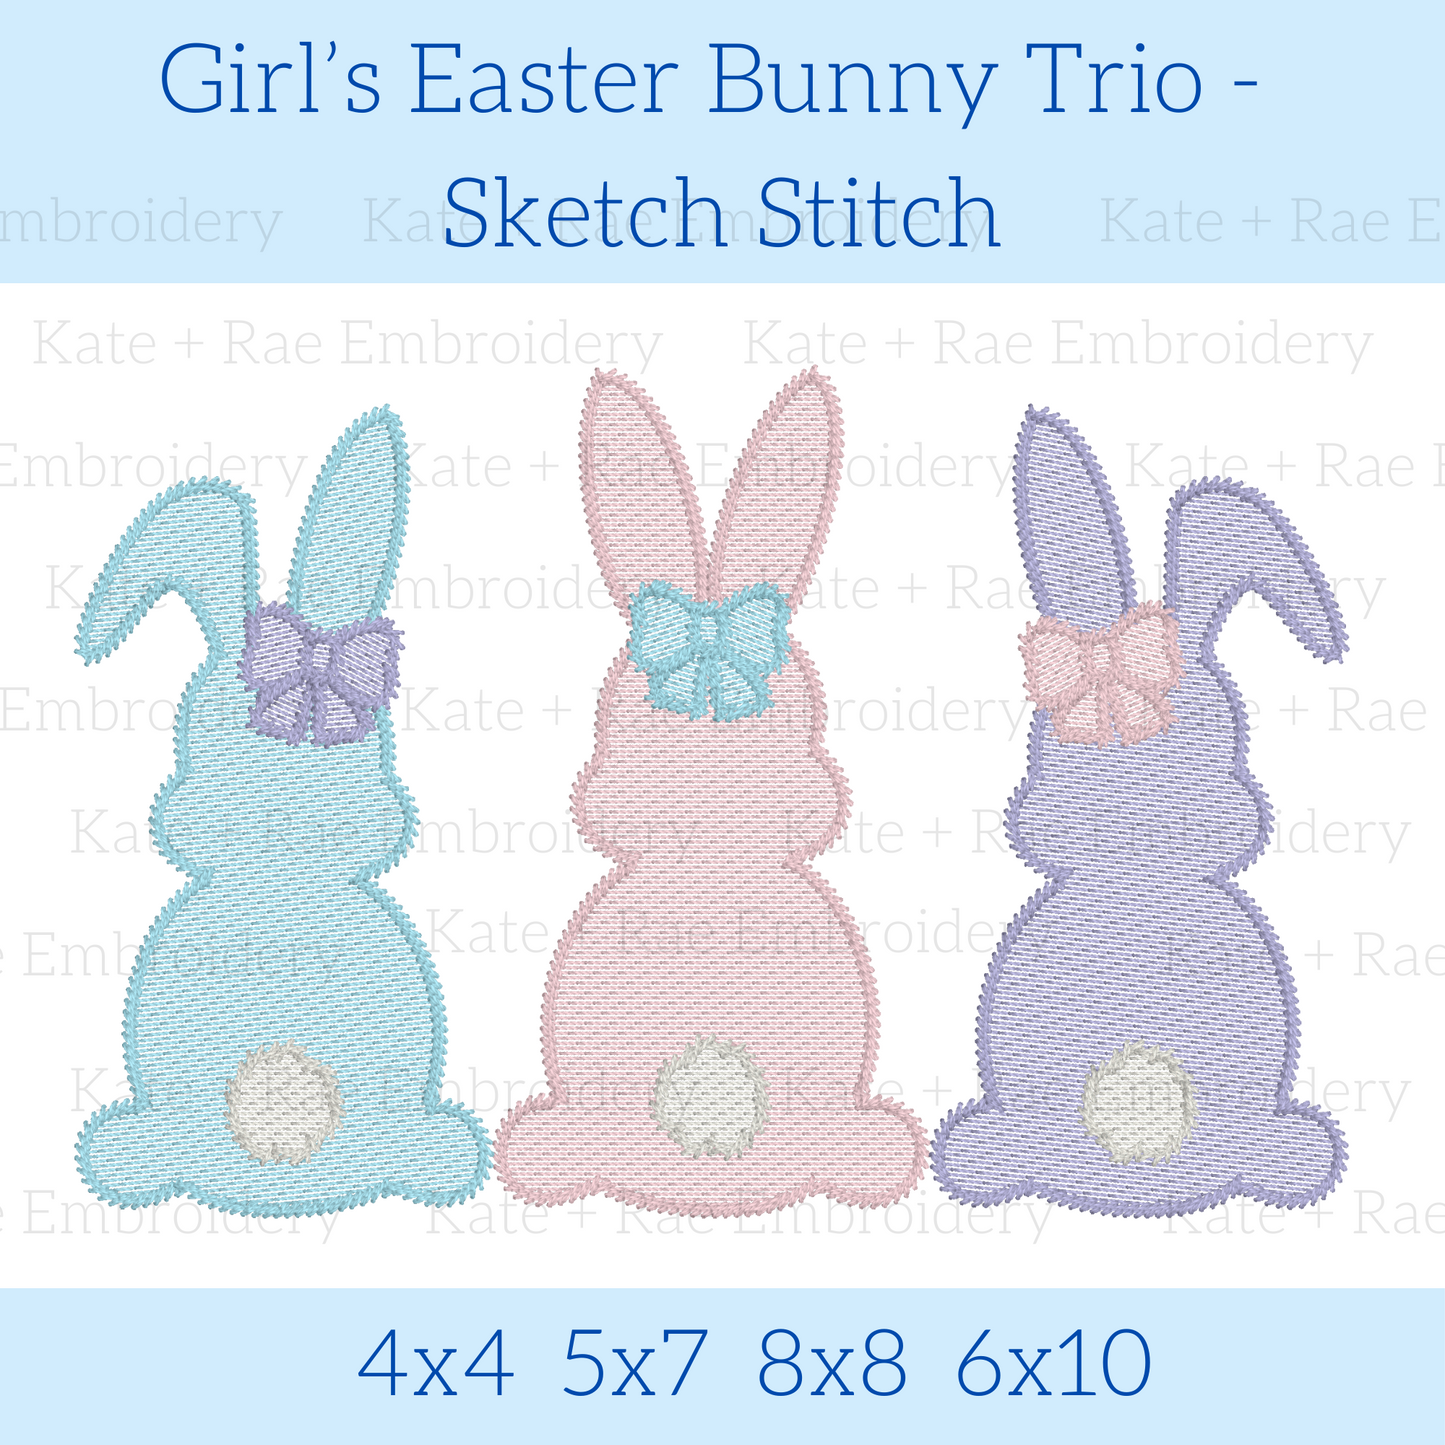 Girl's Easter Bunny Trio Sketch Stitch Embroidery Design